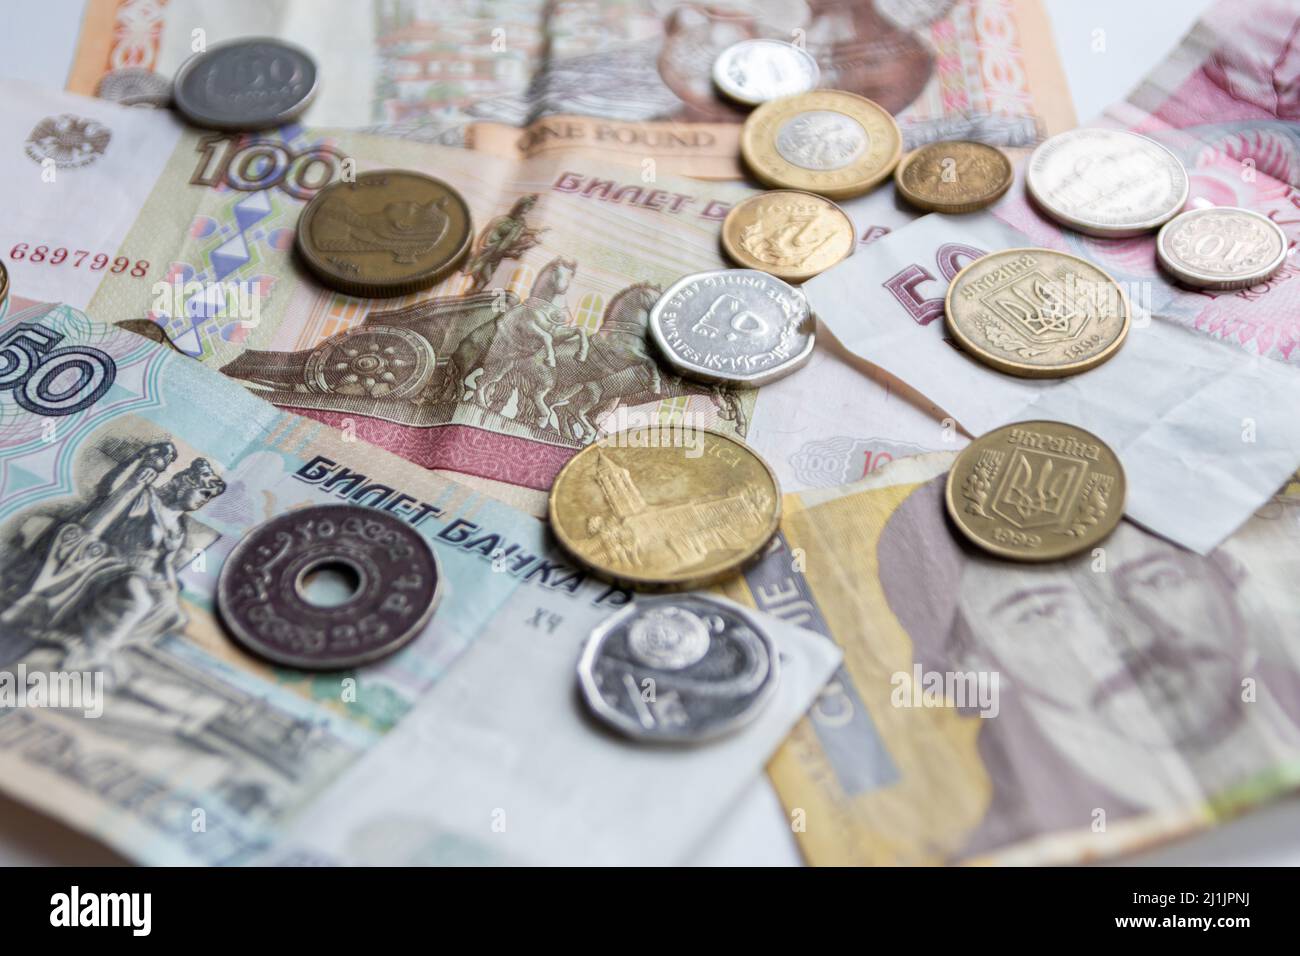 Variety of different bank notes and coins from various countries like euro, pound, emirates money, cyprus bank note and others represent international Stock Photo